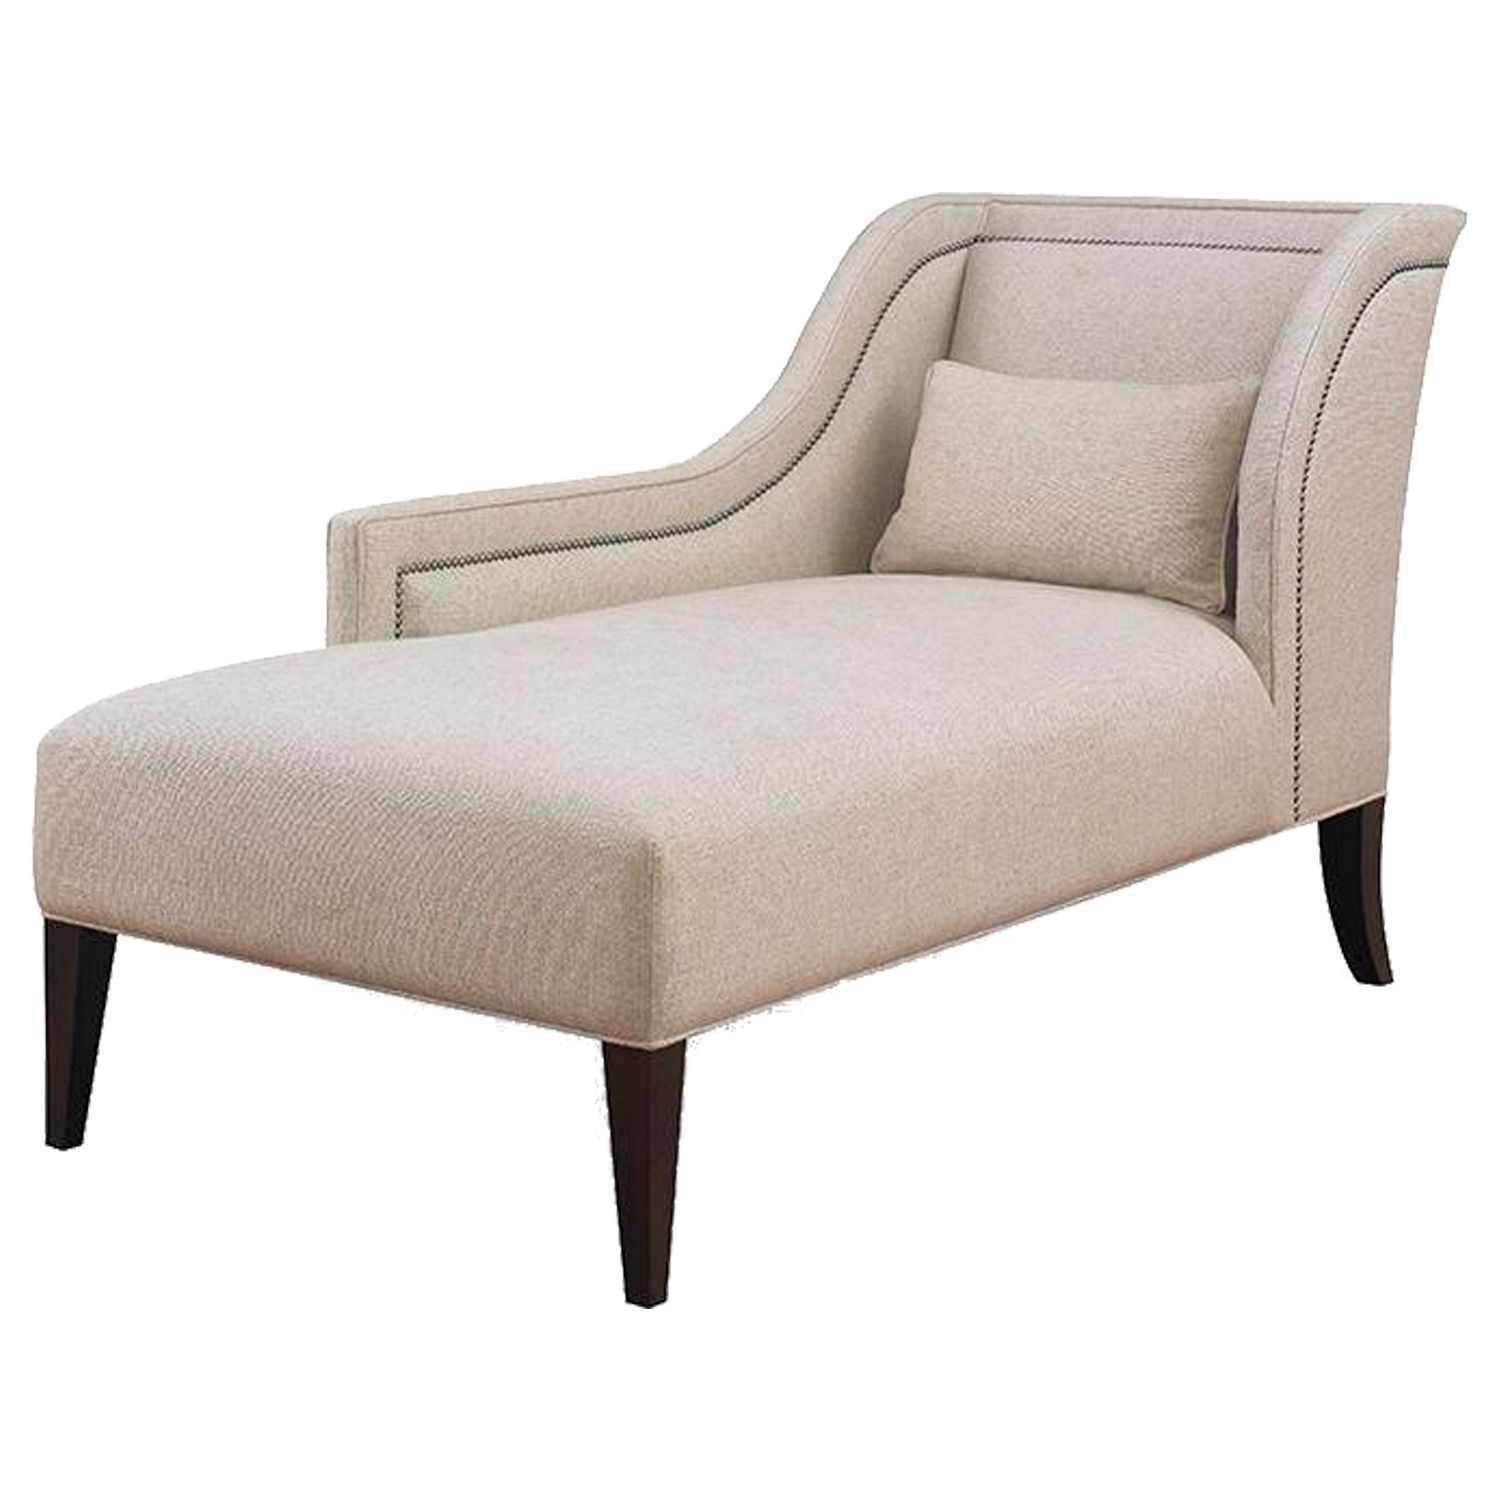 Most Recent Buy Pasadena One Arm Chaisekravet – Made To Order Designer Regarding Chaise Lounge Chairs Without Arms (View 3 of 15)